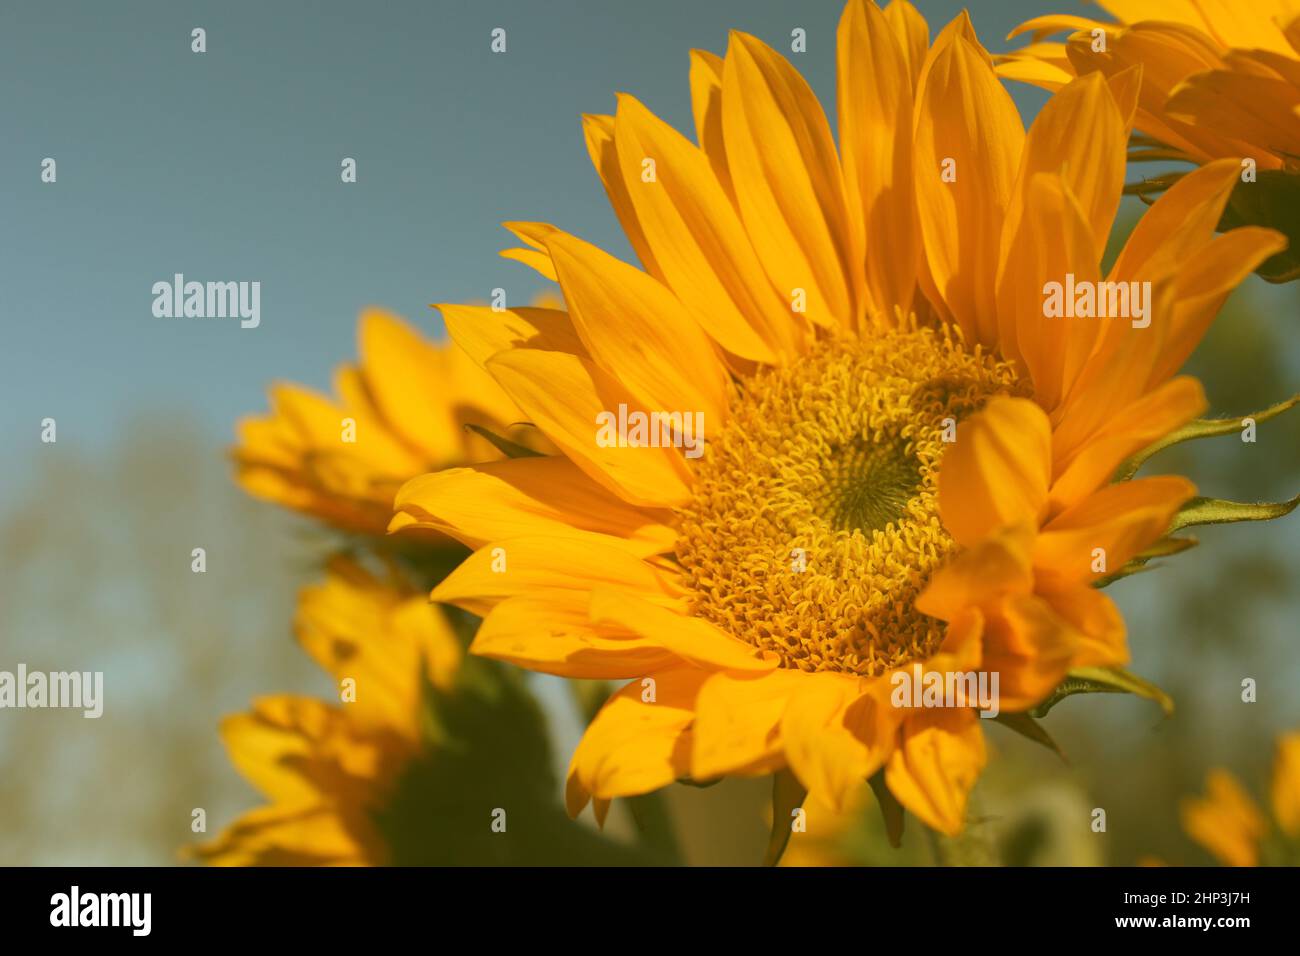 Yellow Sunflowers outdoors Close up Stock Photo